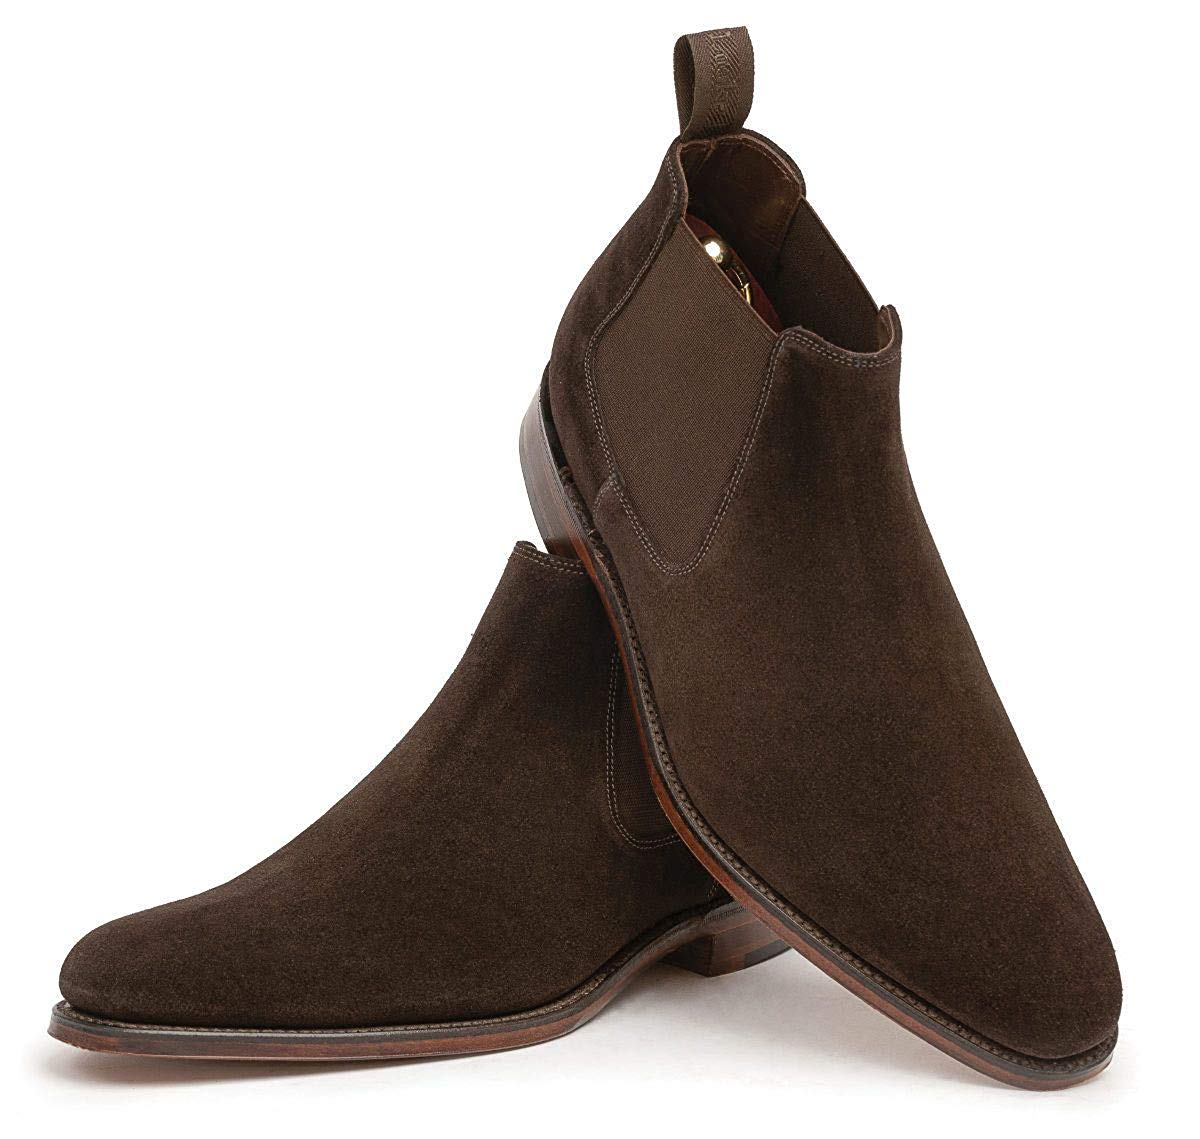 Dark Brown Suede Leather Formal Short Chelsea Slip On Boot Shoes for Men with Leather Sole. Goodyear Welted Construction Available.